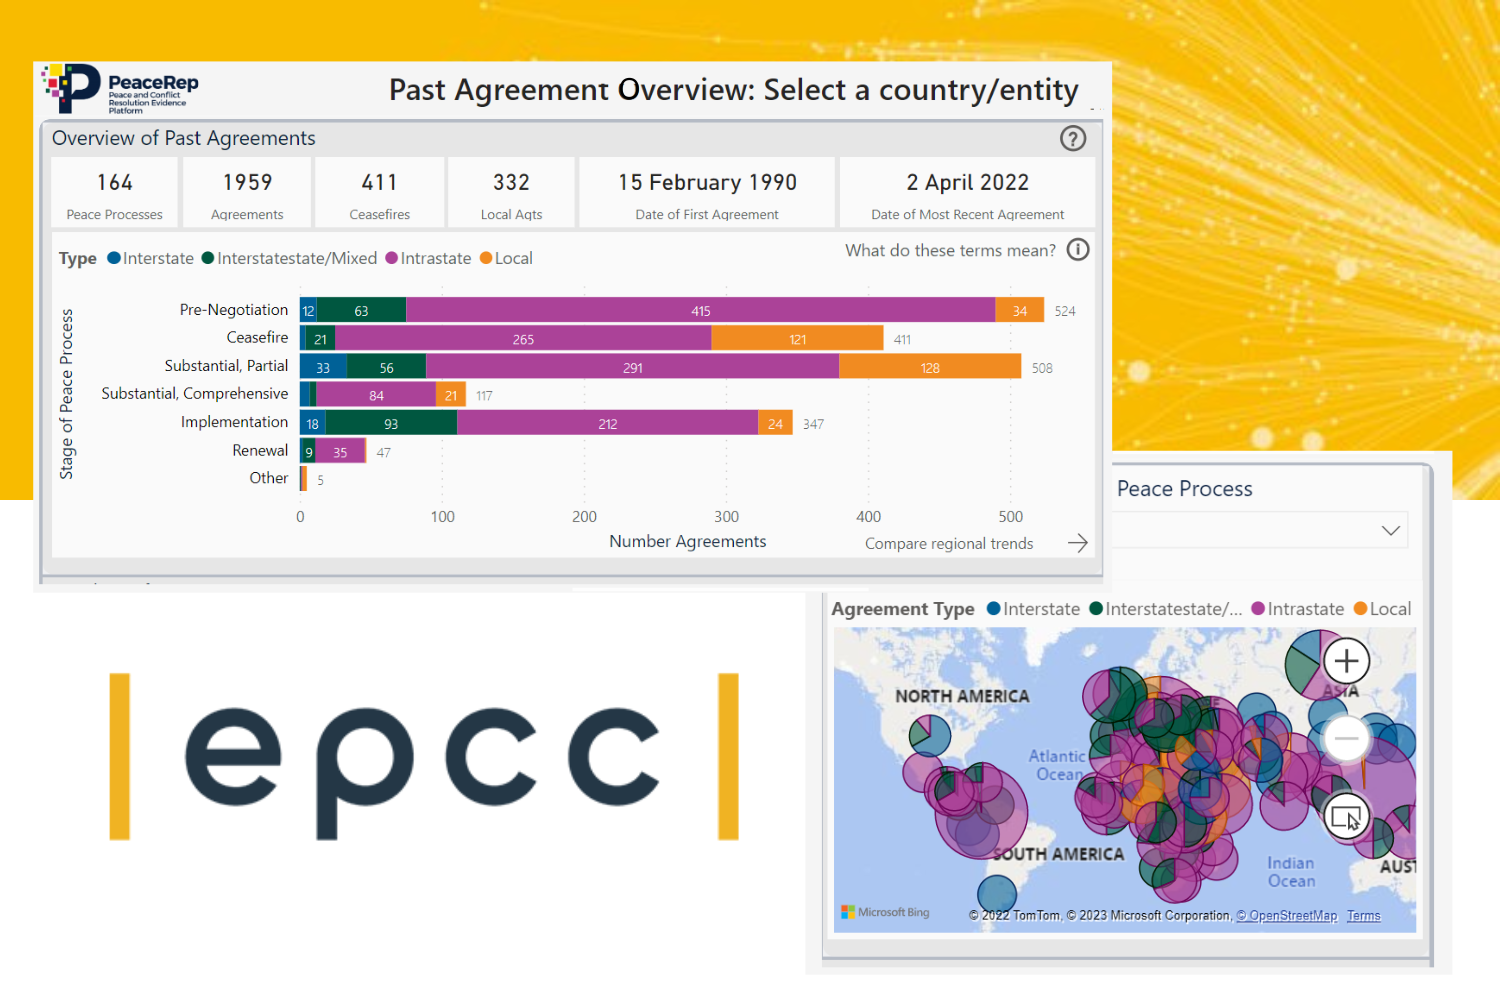 EPCC supports PeaceRep in building an online platform for peace process data analytics